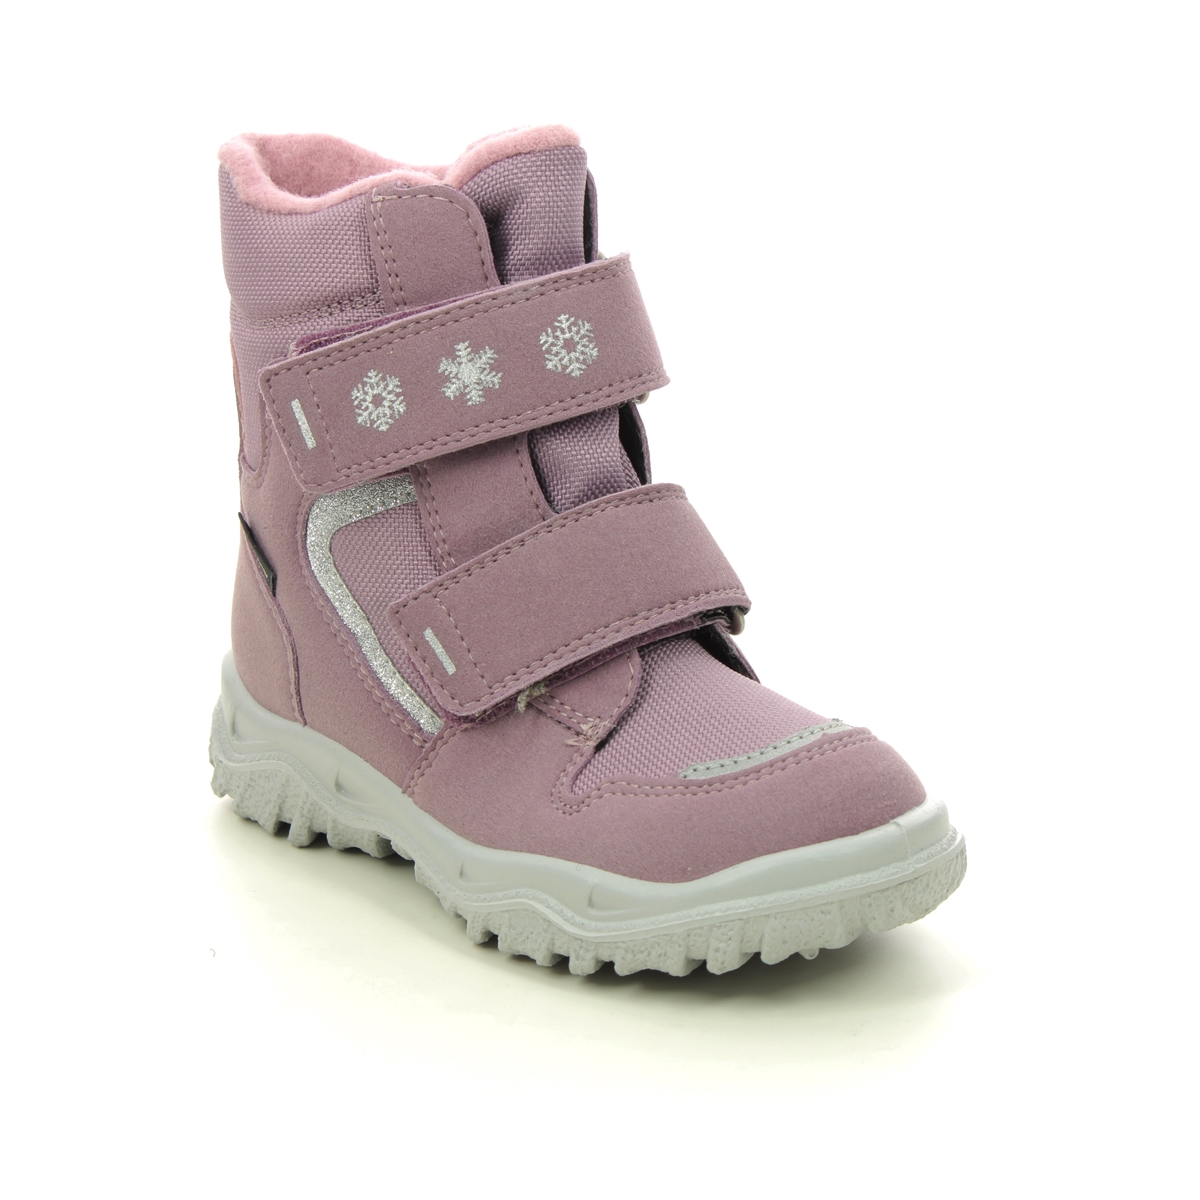 Superfit Husky  Inf Gtx Pink Leather Kids Toddler Girls Boots 1000045-8510 In Size 24 In Plain Pink Leather For kids